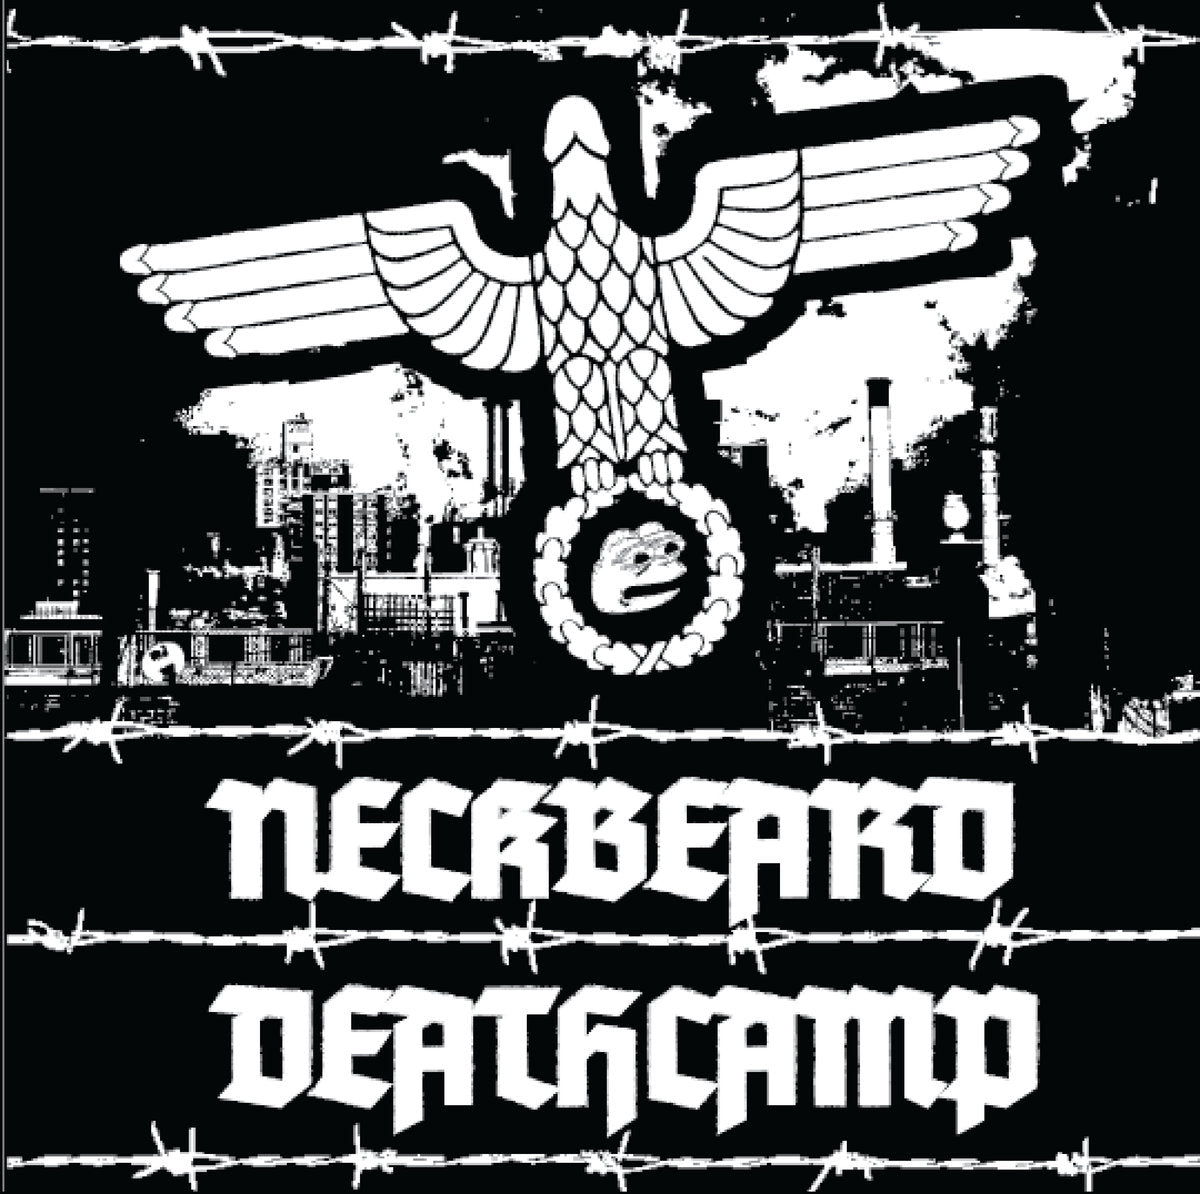 Neckbeard Deathcamp - White Nationalism Is For Basement Dwelling Losers LP - Vinyl - Prosthetic